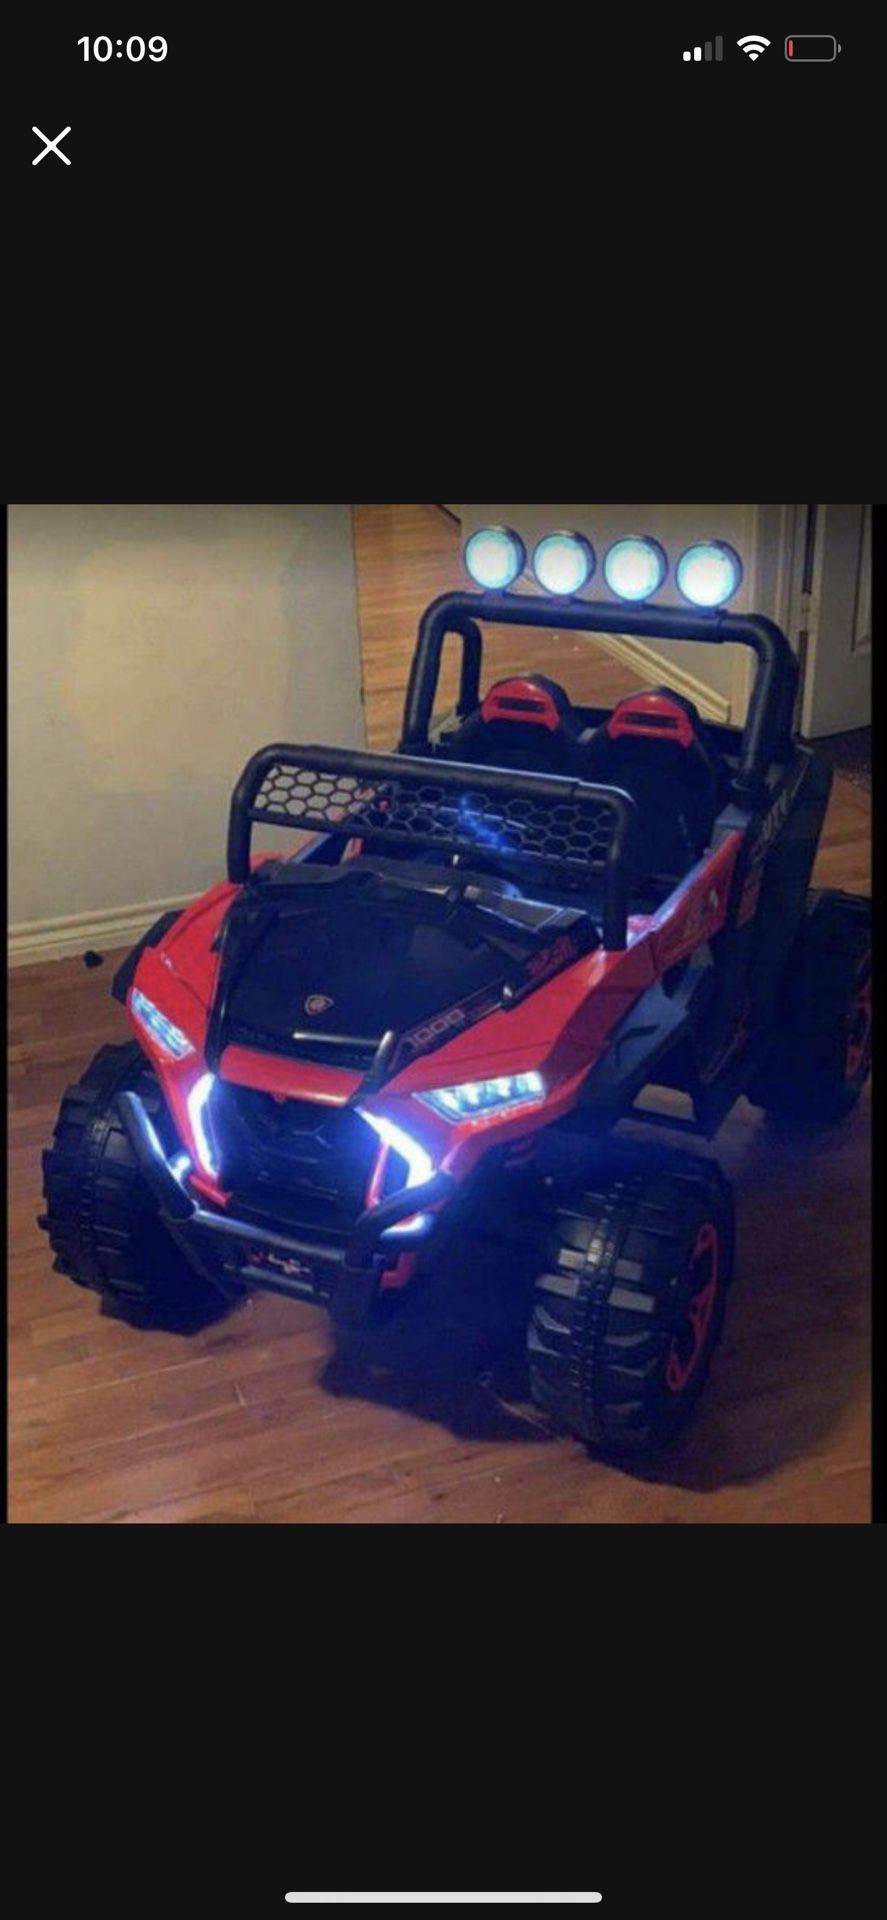 KIDS RIDE ON CAR WITH REMOTE CONTROL AND MUSIC 🎶 AND LIGHTS 